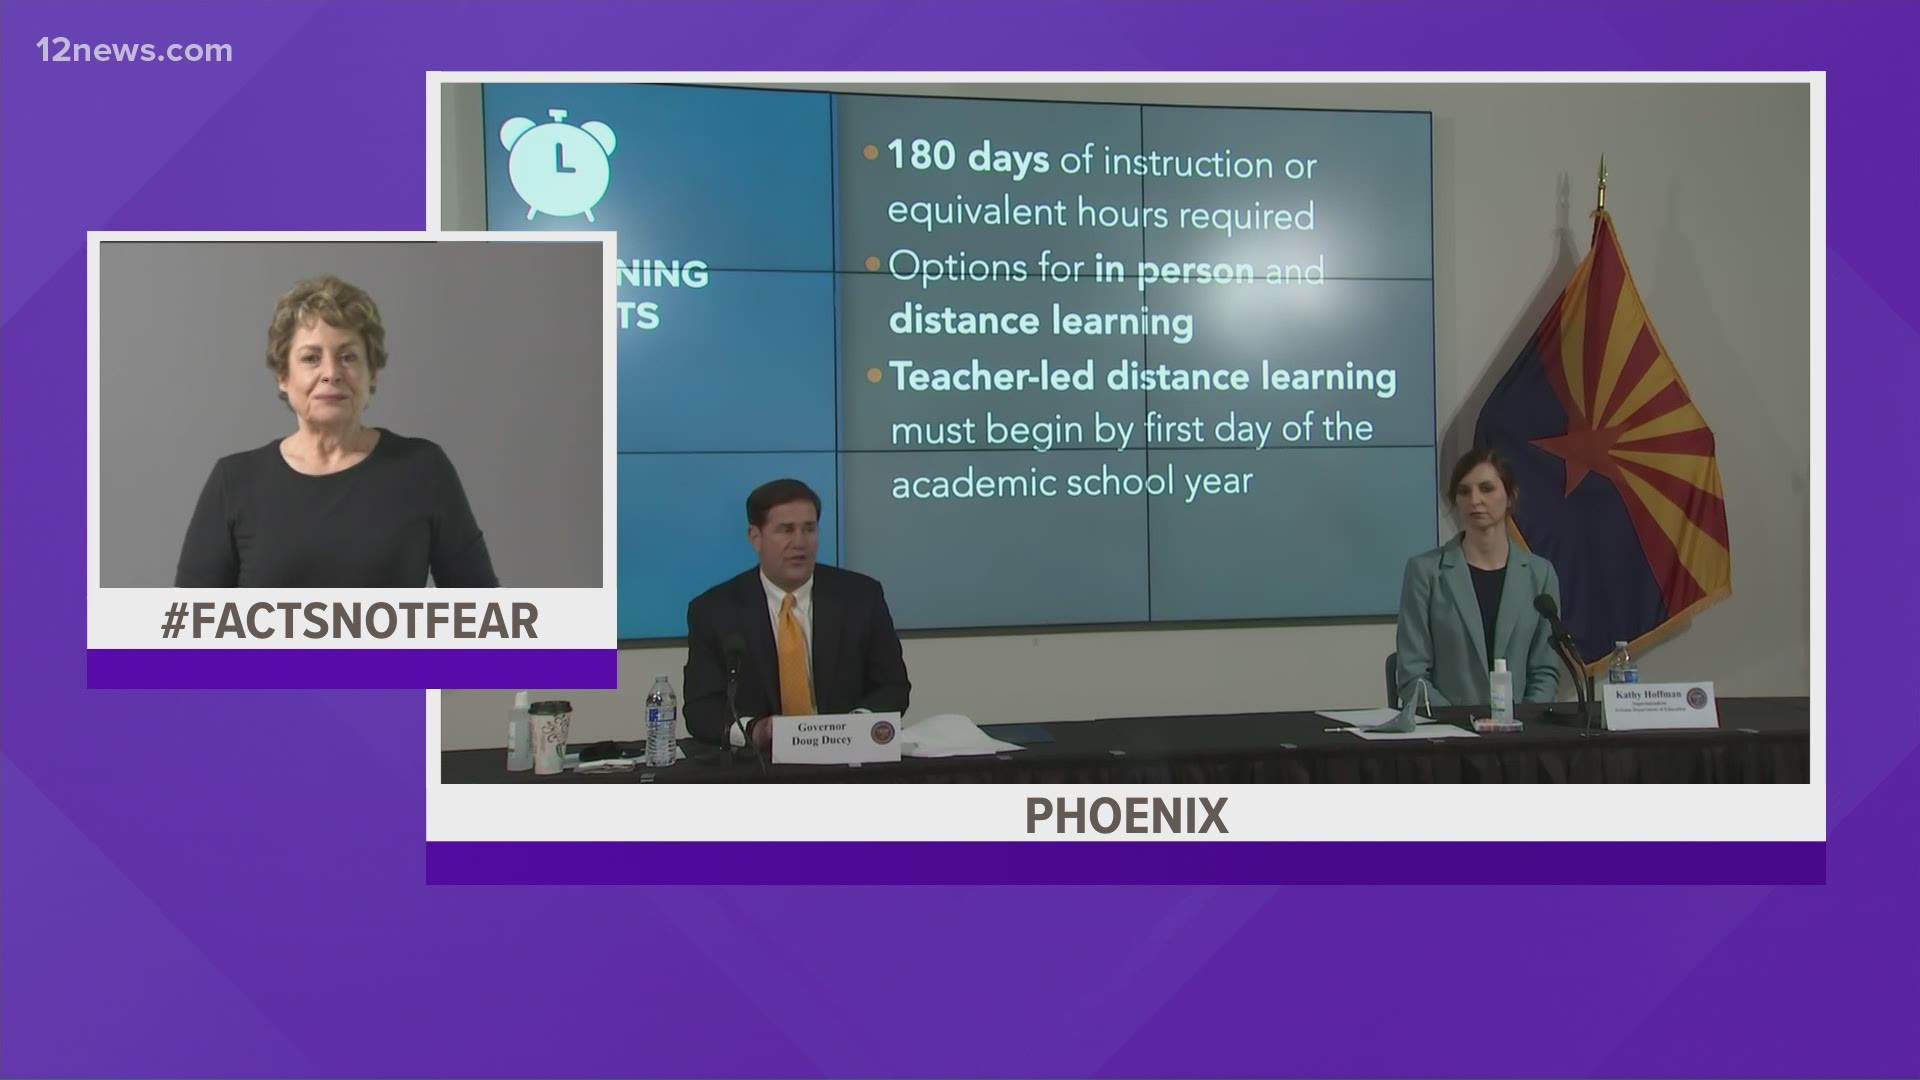 Gov. Ducey announced Thursday that parents will have the option to enroll kids in distance learning or in-person learning. He said kids need 180 days of instruction.